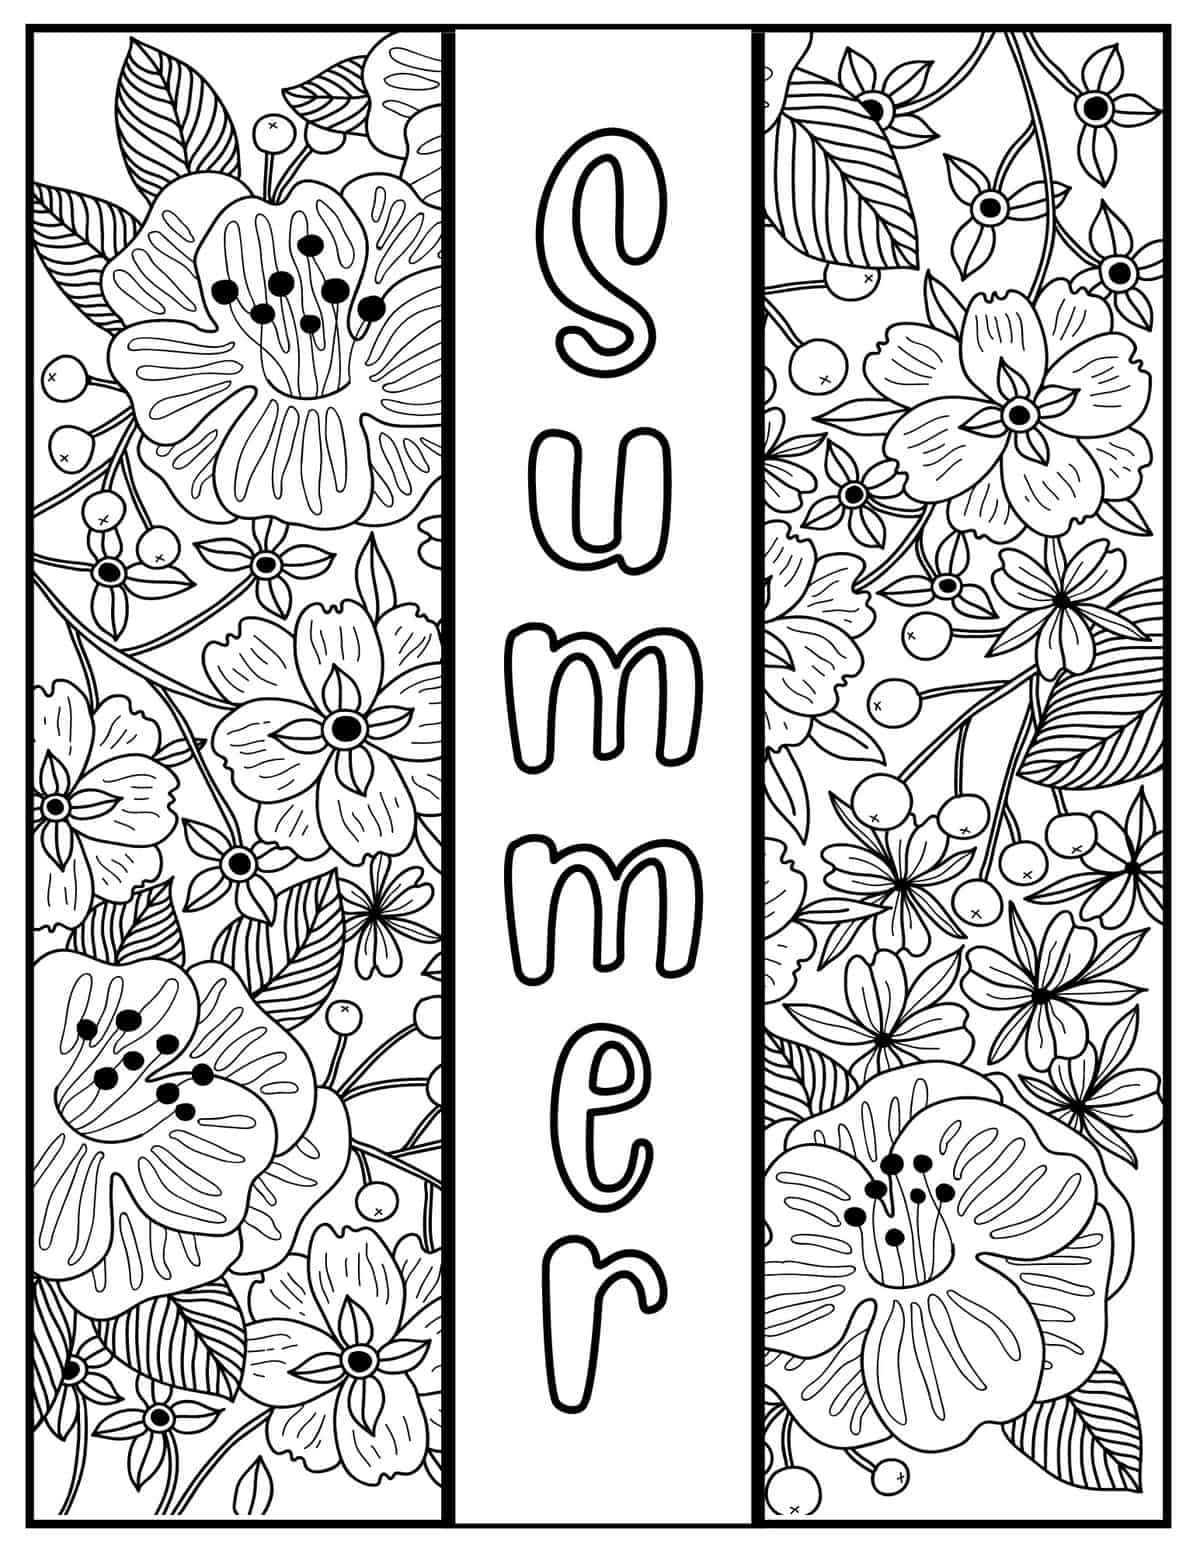 20 Free Summer Coloring Pages for Kids   Prudent Penny Pincher